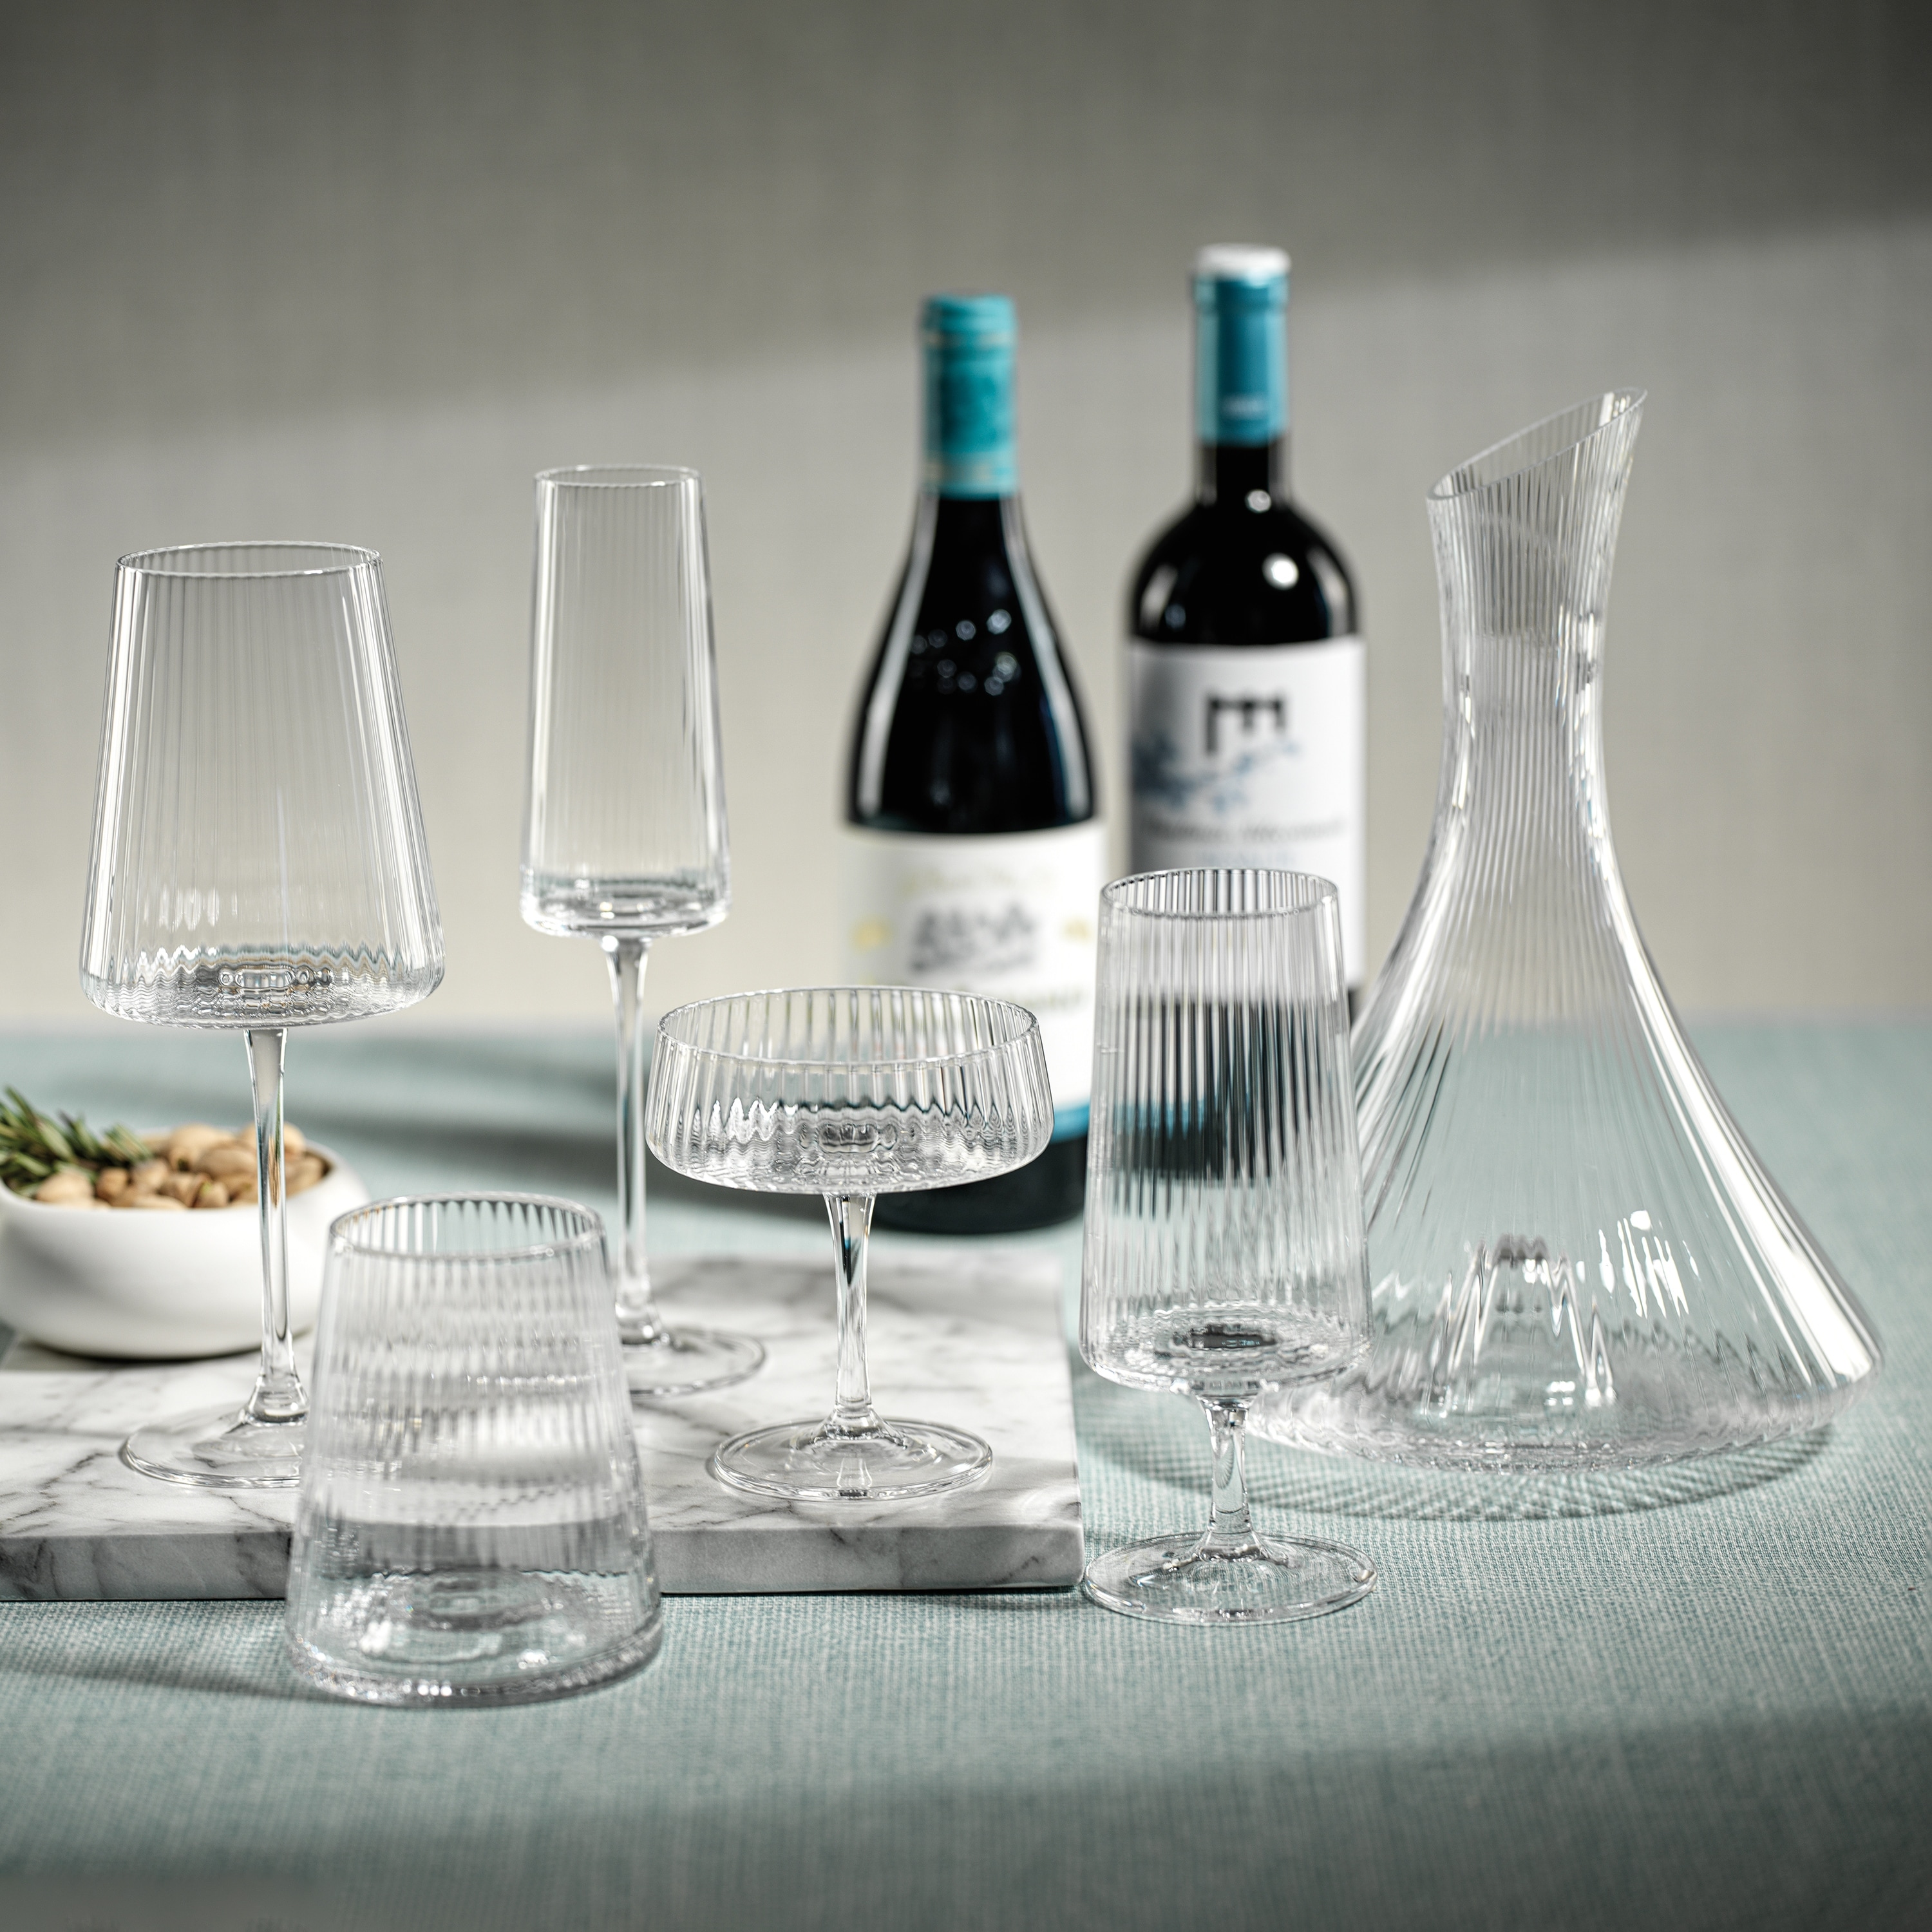 https://ak1.ostkcdn.com/images/products/is/images/direct/0155d432978ffe49ed2c4183d2e94485bf3fea30/Benin-Fluted-Textured-Wine-Glasses%2C-Set-of-4.jpg